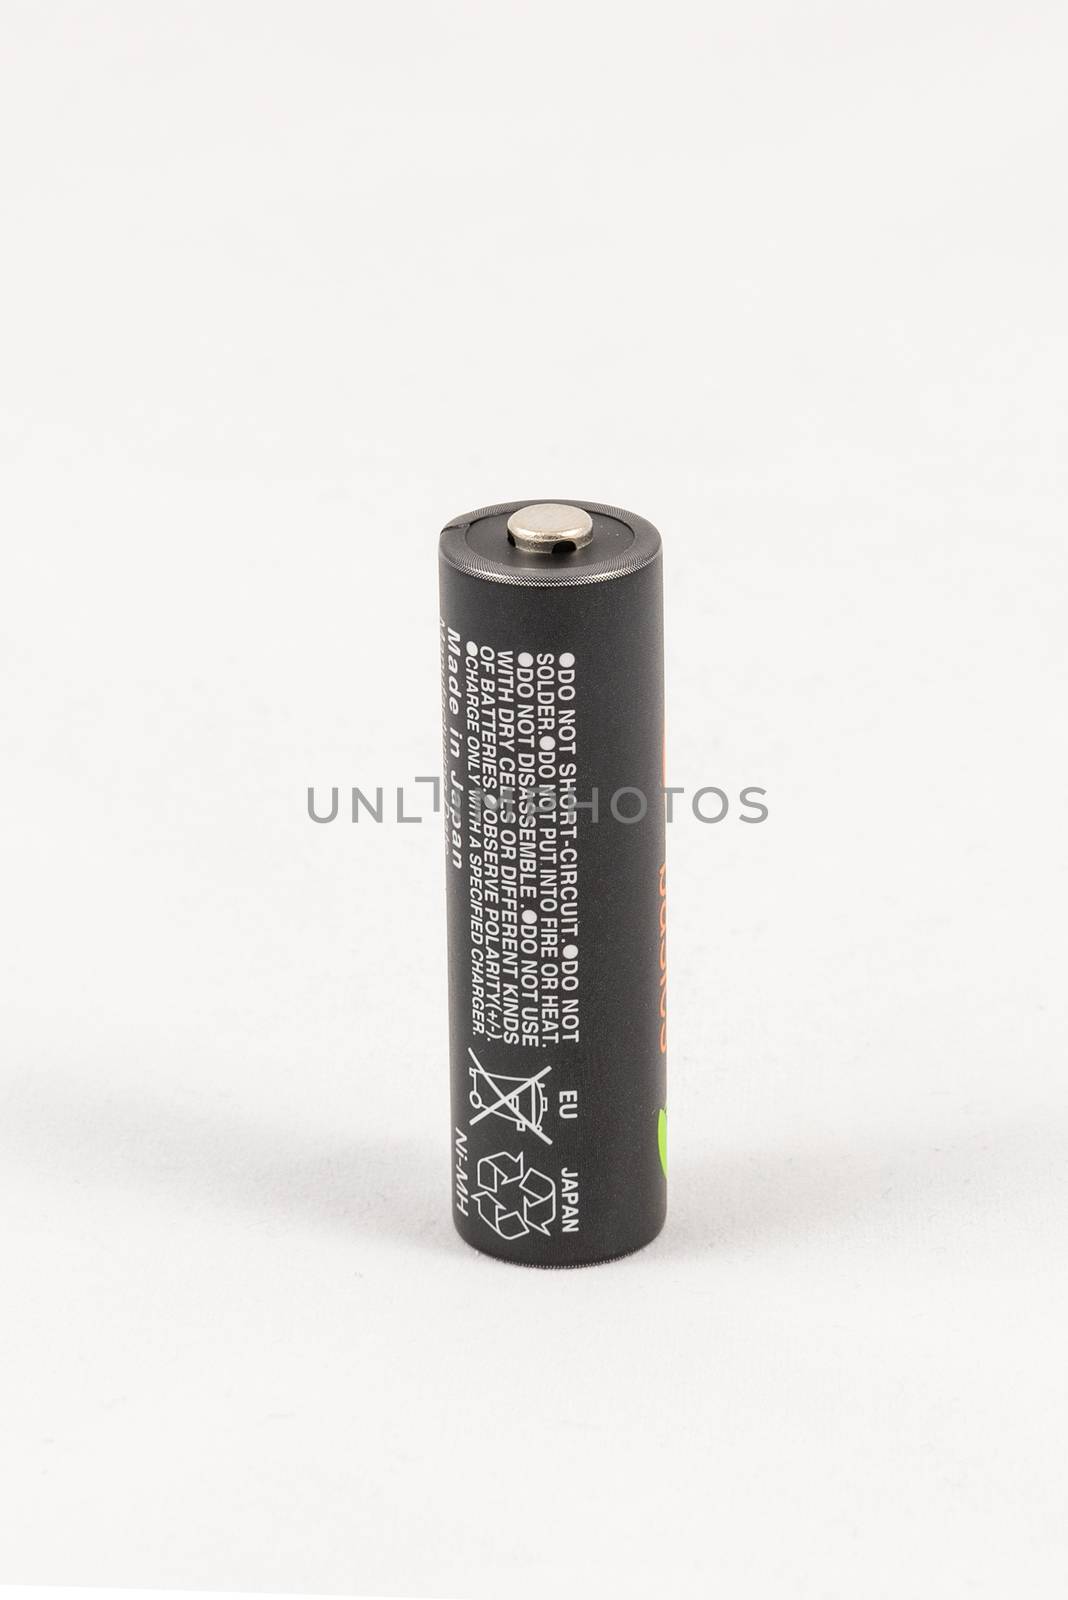 Single unbranded black AA rechargeable battery by marcorubino